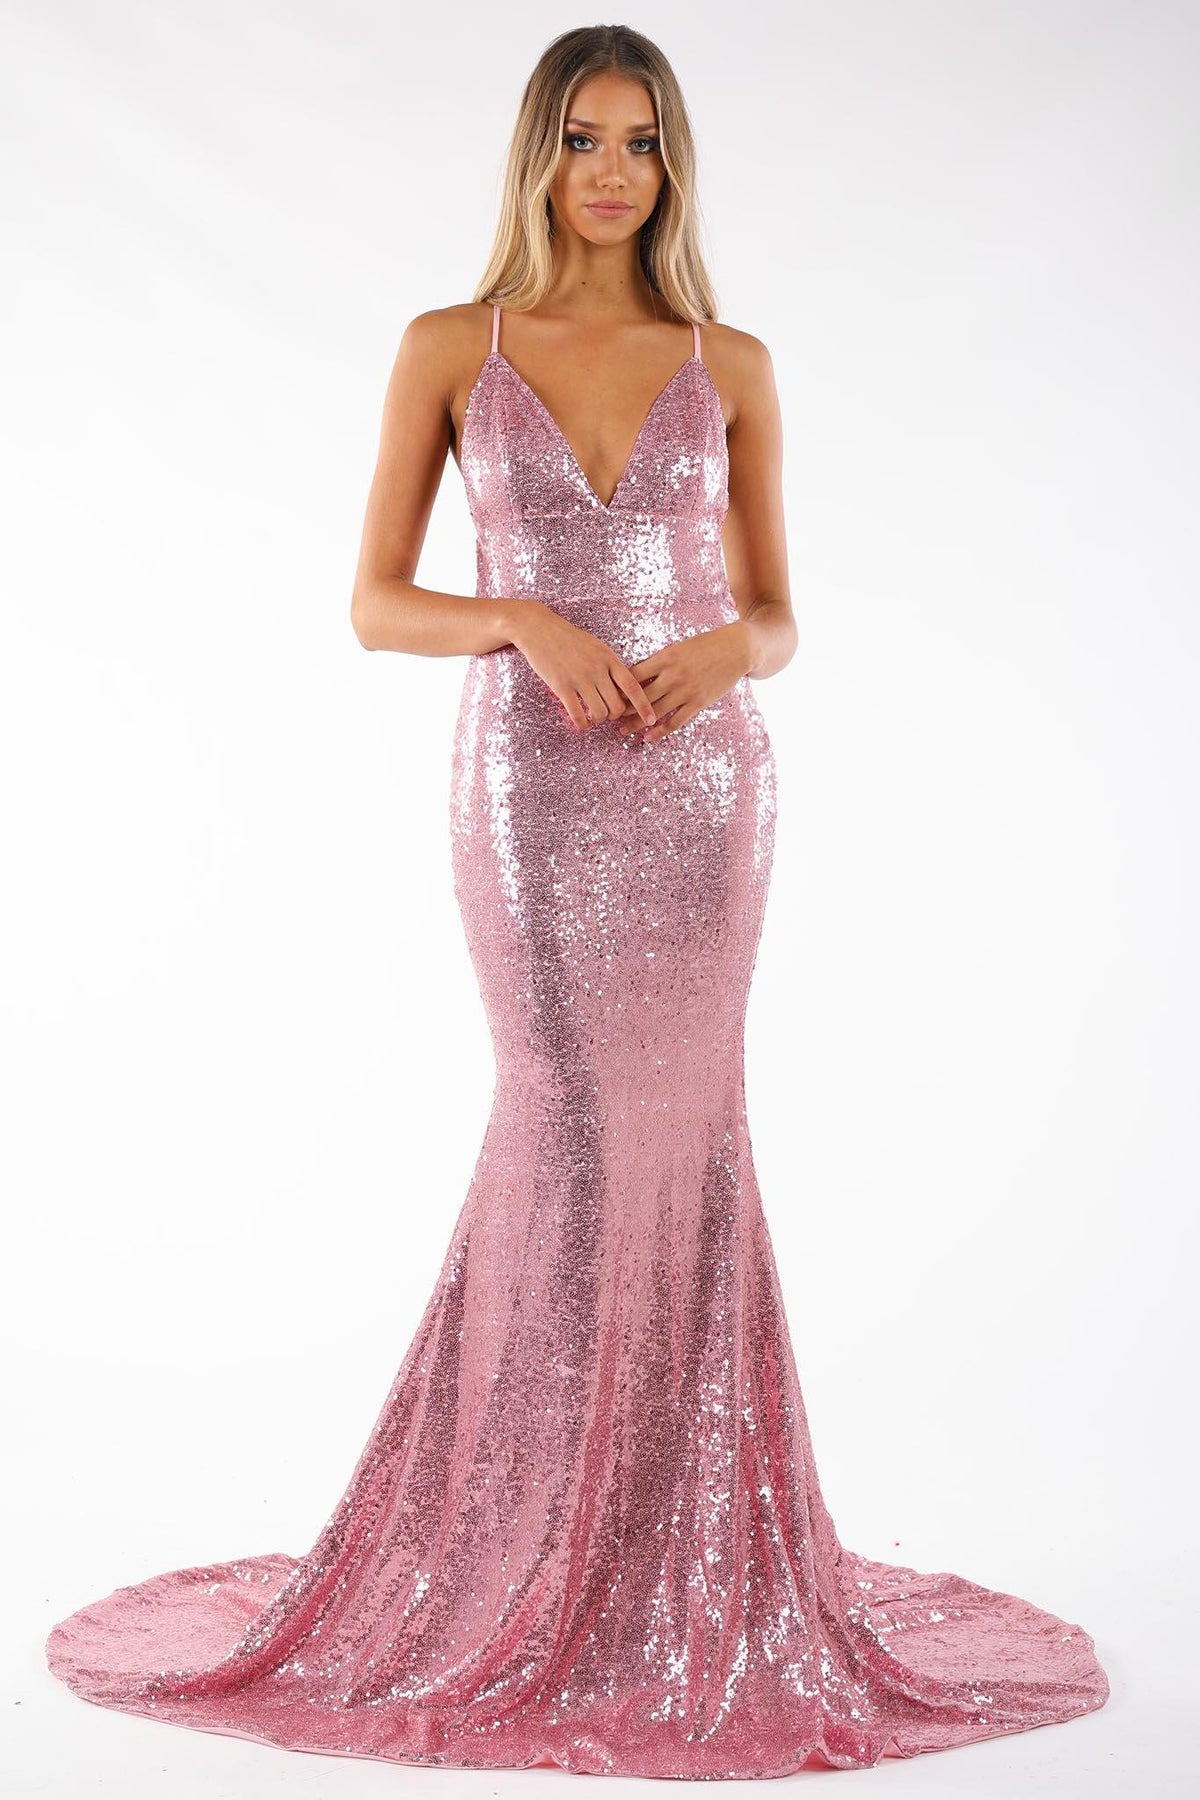 Bright Pink Sequin Formal Prom Sleeveless Gown featuring Deep V Neck, V Shaped Backless Design, Thin Shoulder Straps, and Long Train